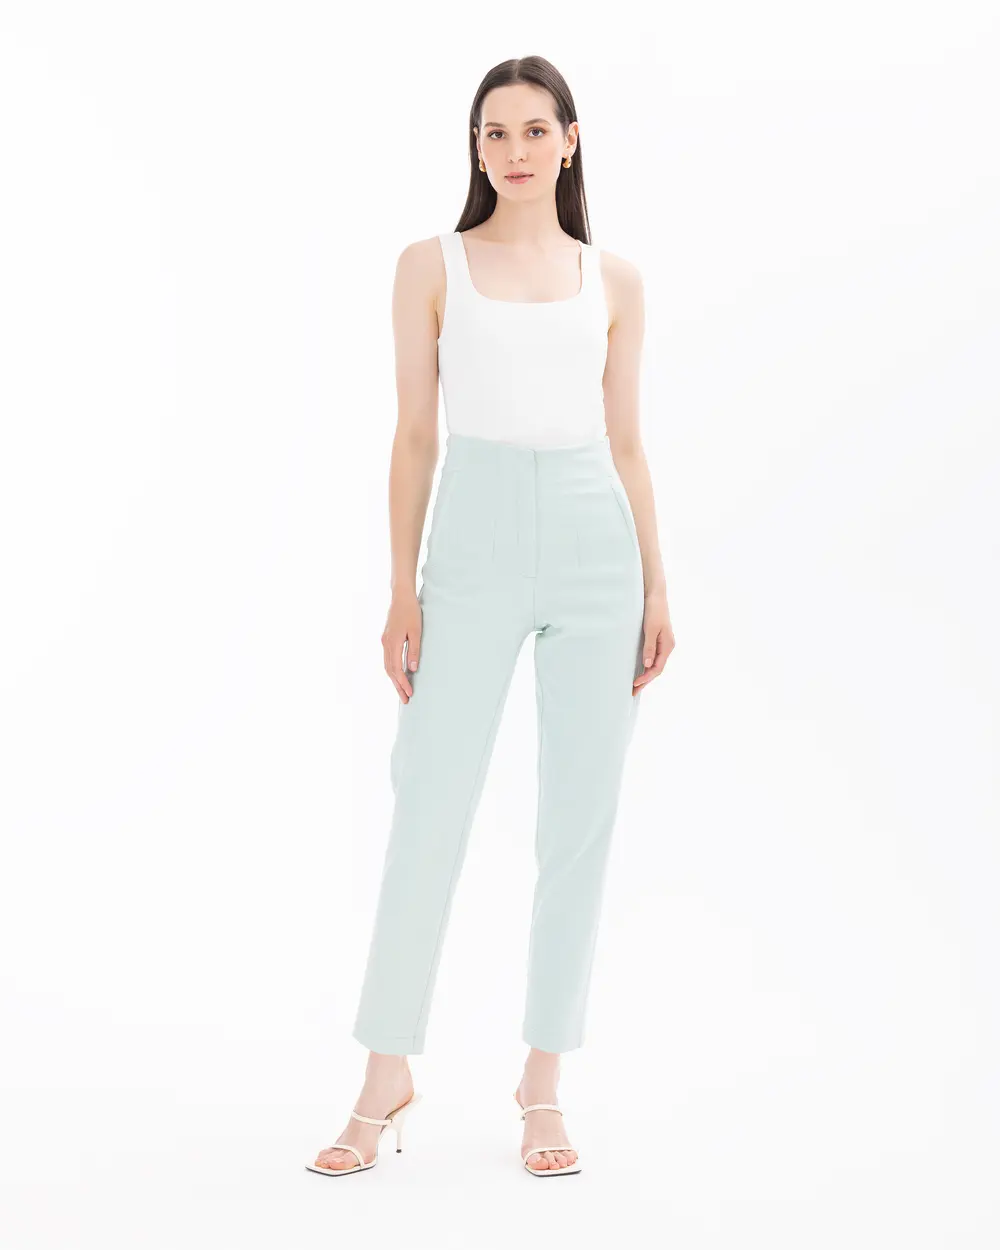 Narrow Leg Trousers with Pockets